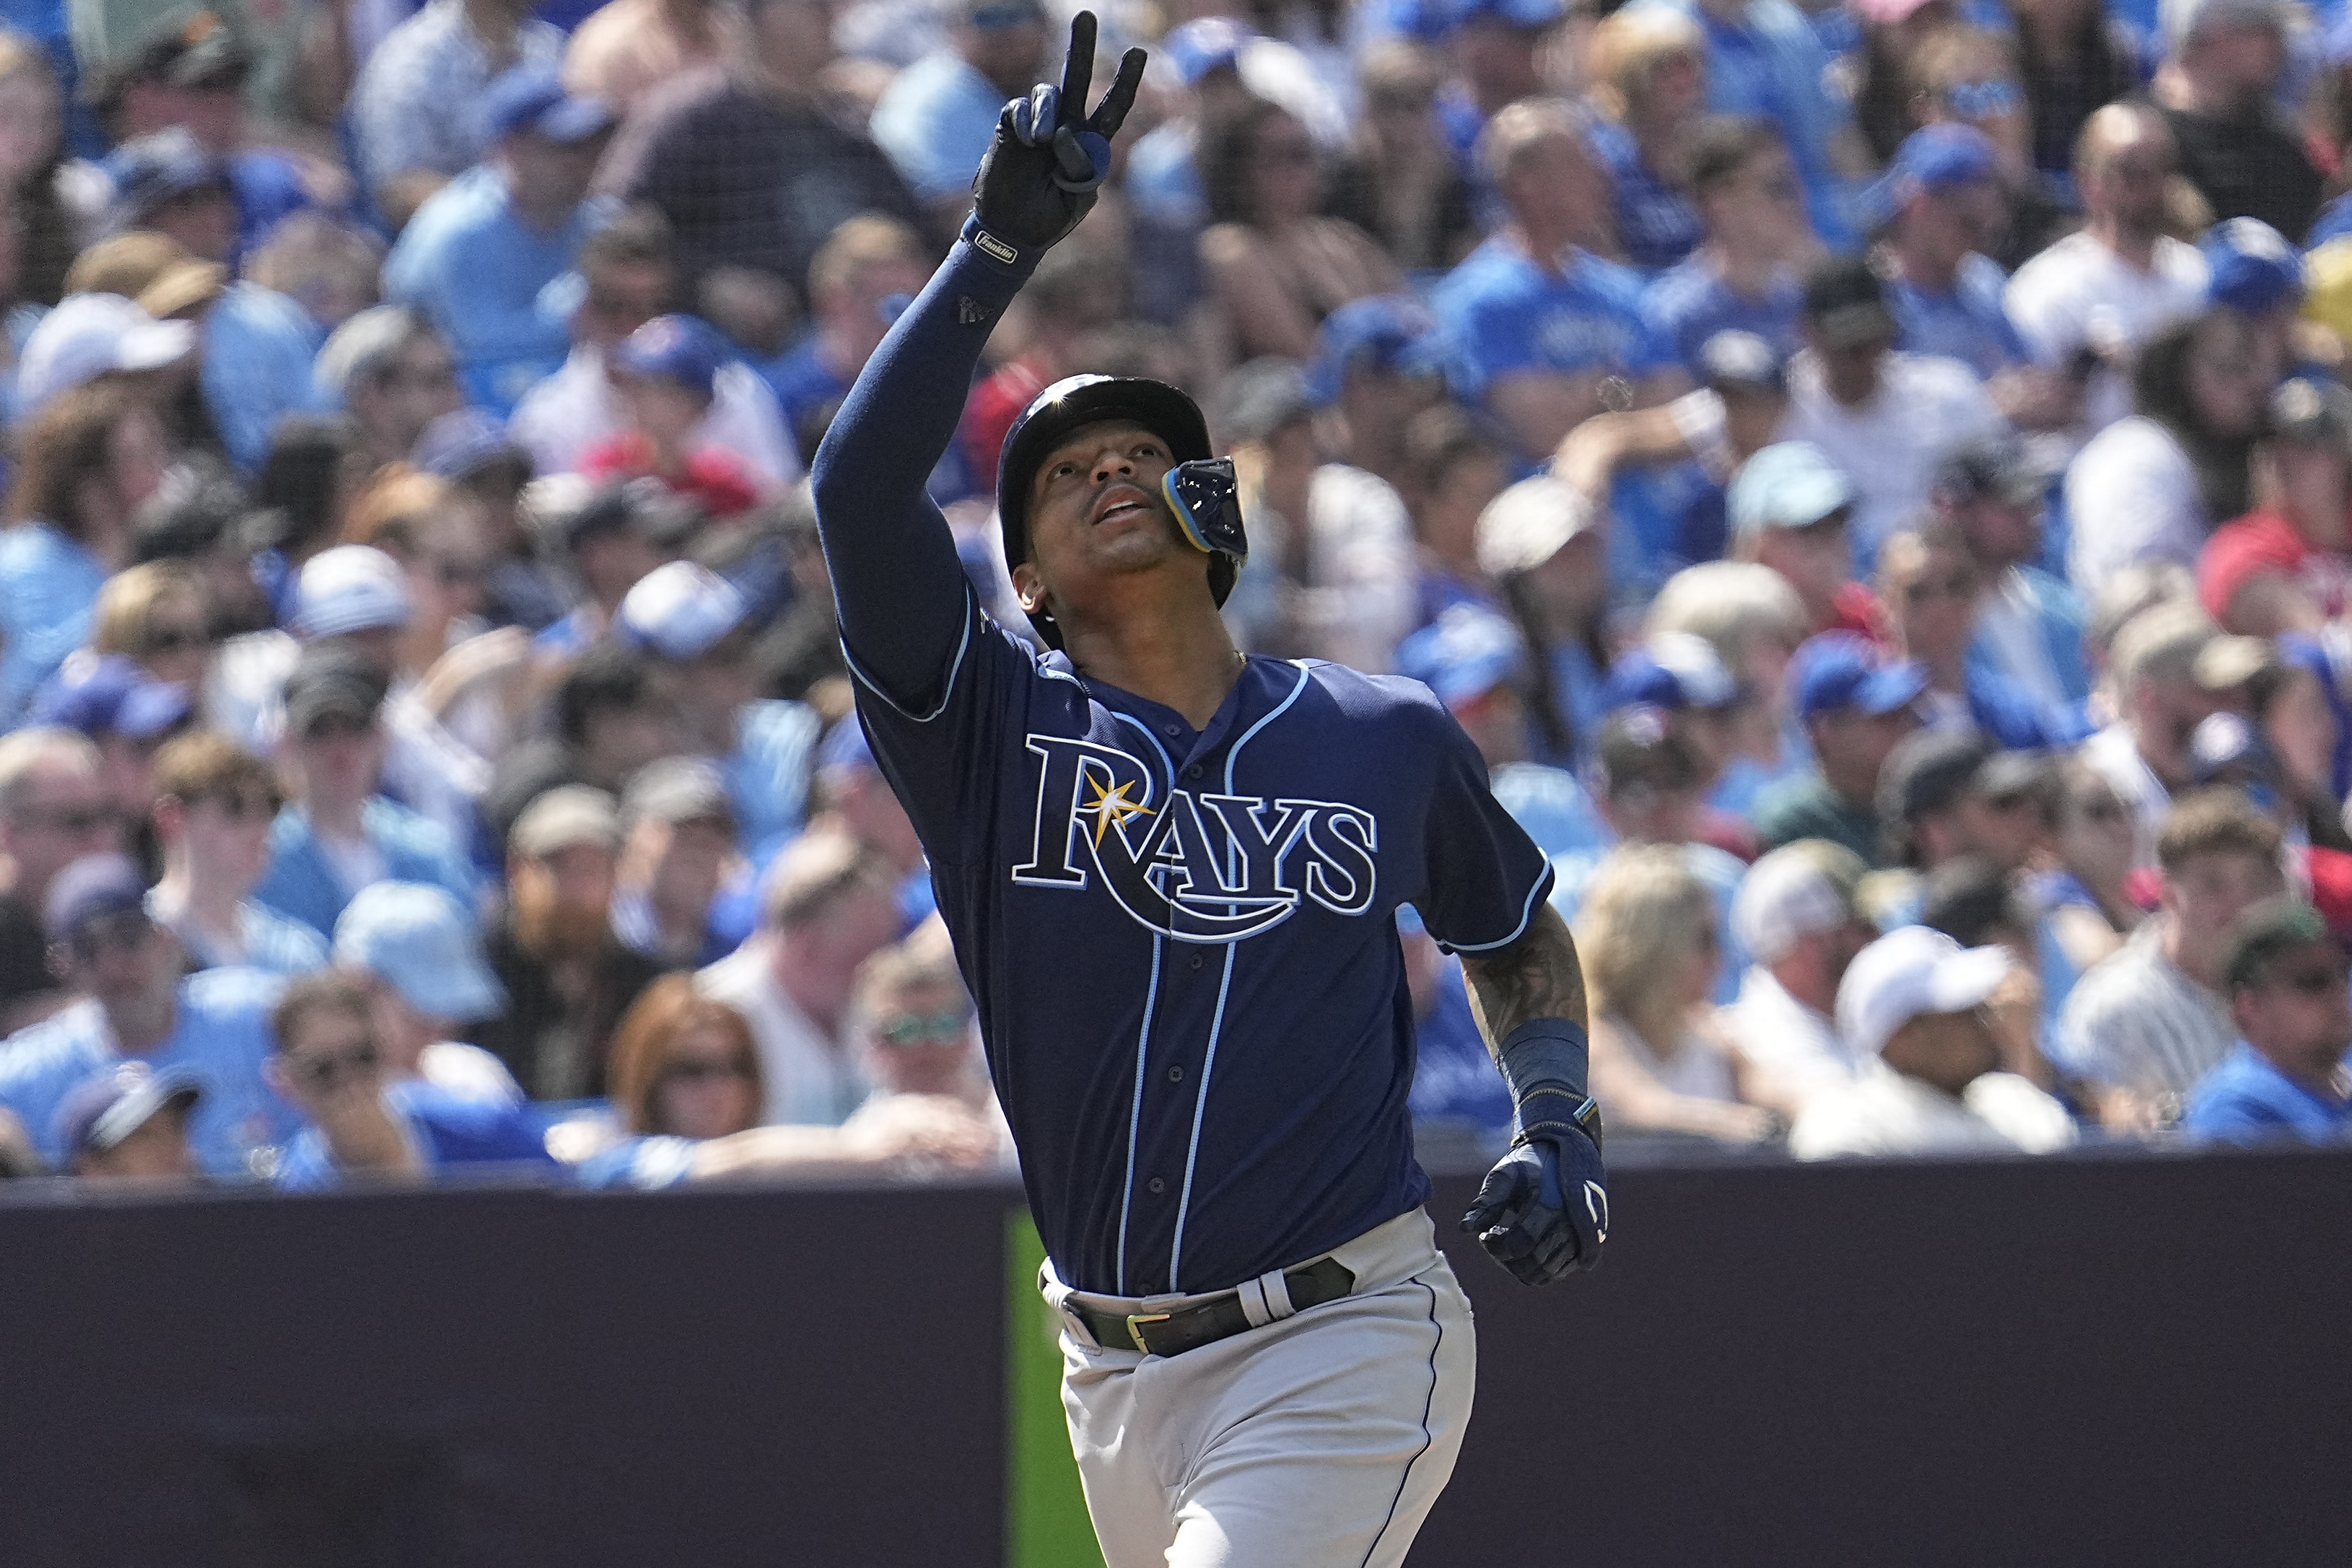 Rays surrender 4 home runs as Brewers sweep Tampa Bay